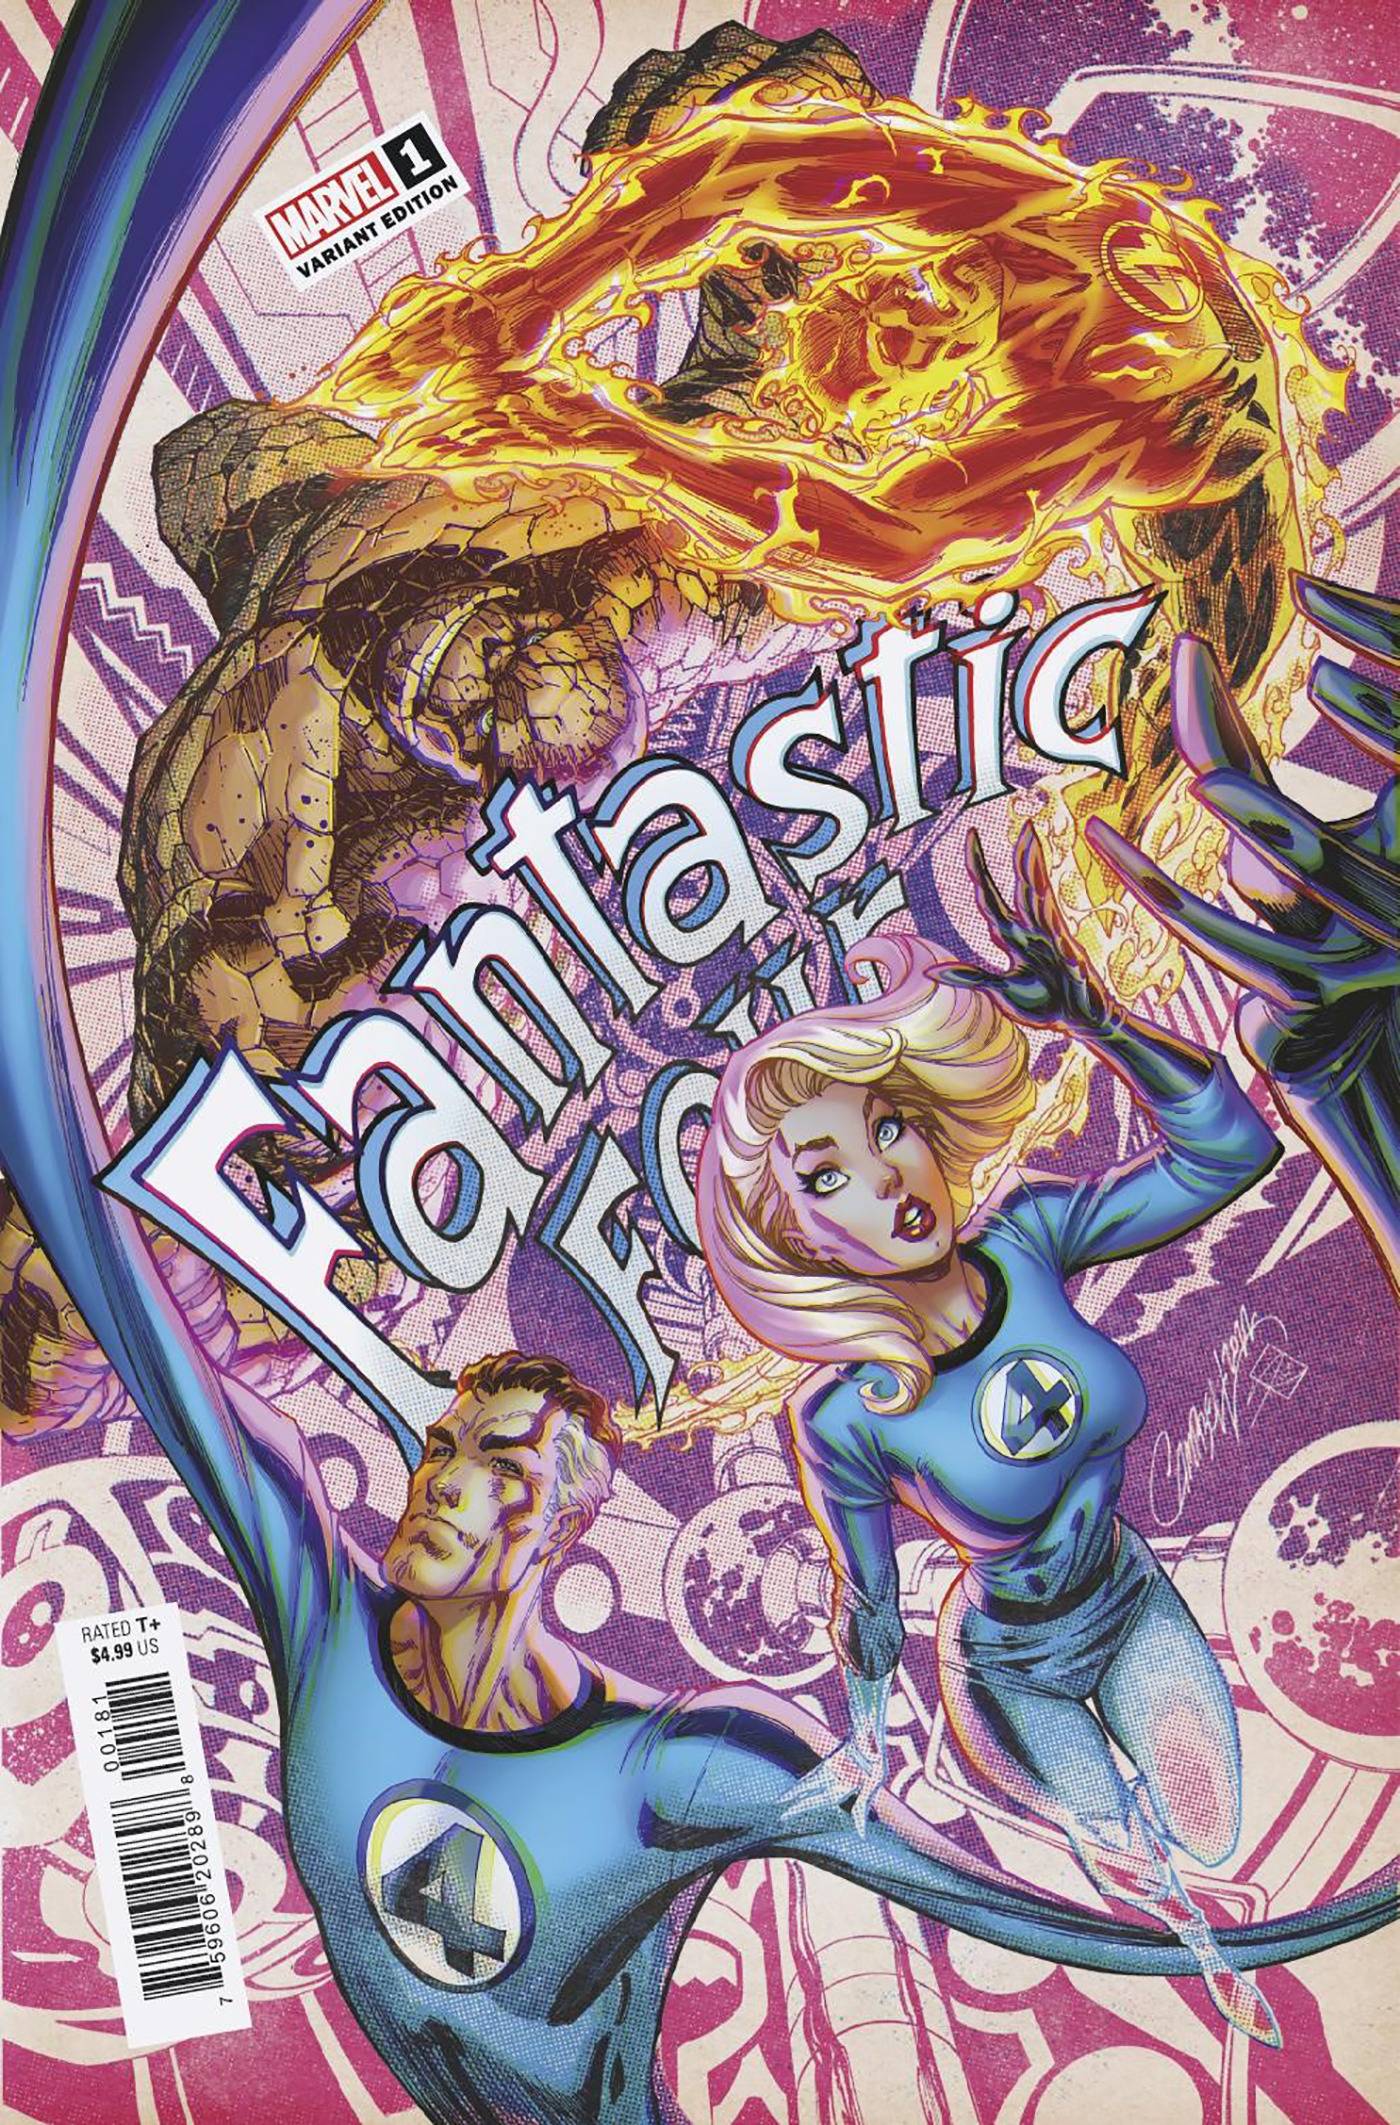 11/09/2022 FANTASTIC FOUR #1 JS CAMPBELL ANNIVERSARY VARIANT